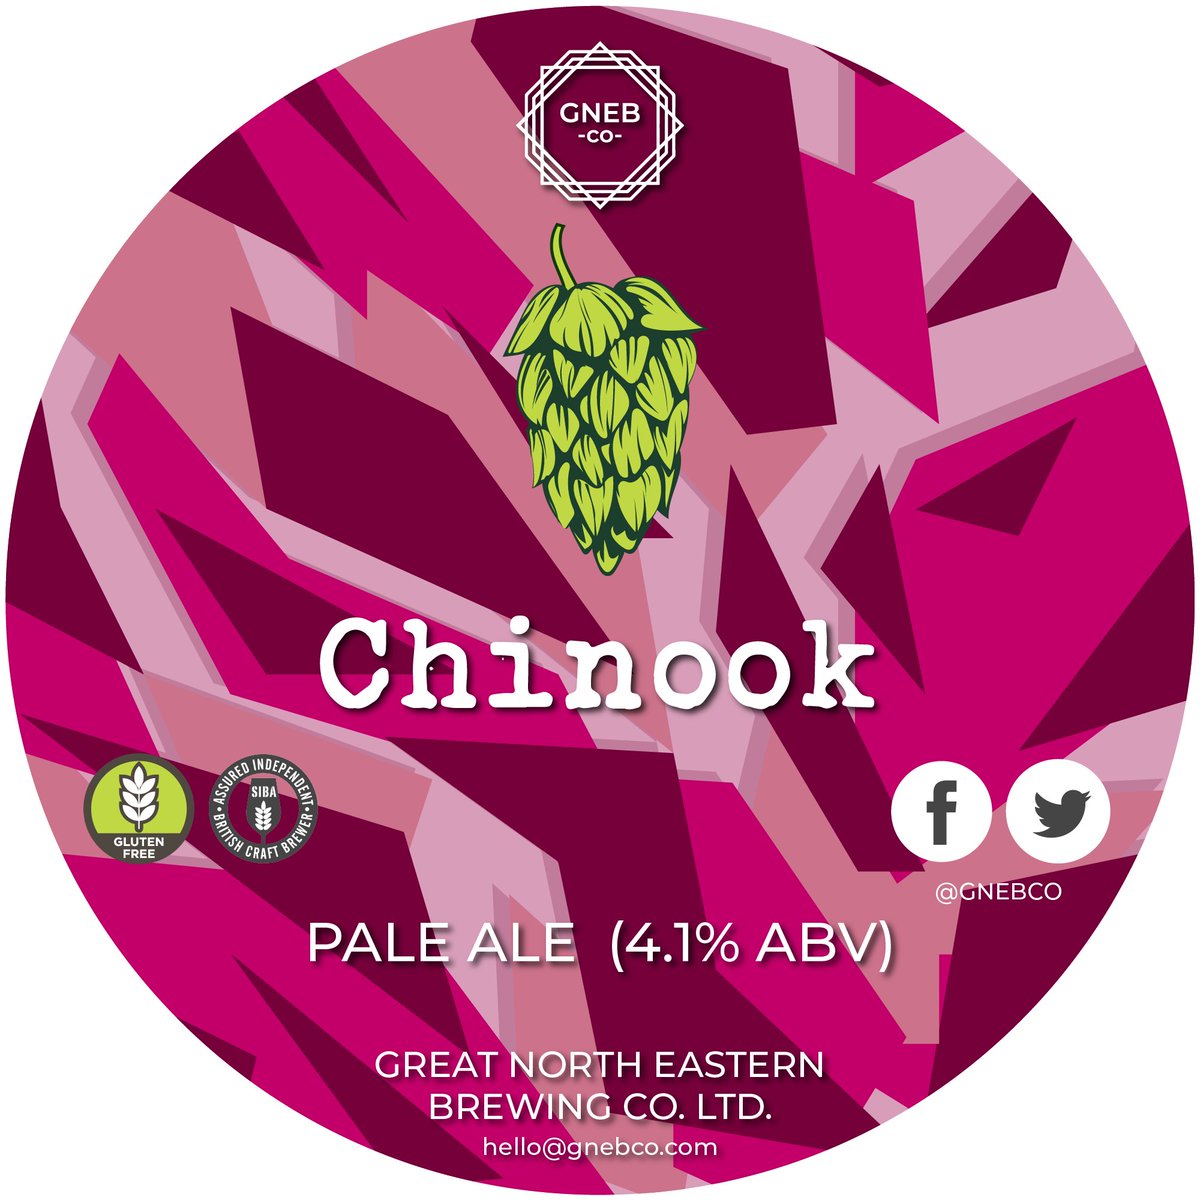 Coming soon to Cask!! Chinook pale ale 4.1%....A sessionable hoppy pale ale. Made with chinook hops known for their strong and distinctive pine-like aroma. Available in cask only, call the office on (0191)4474462